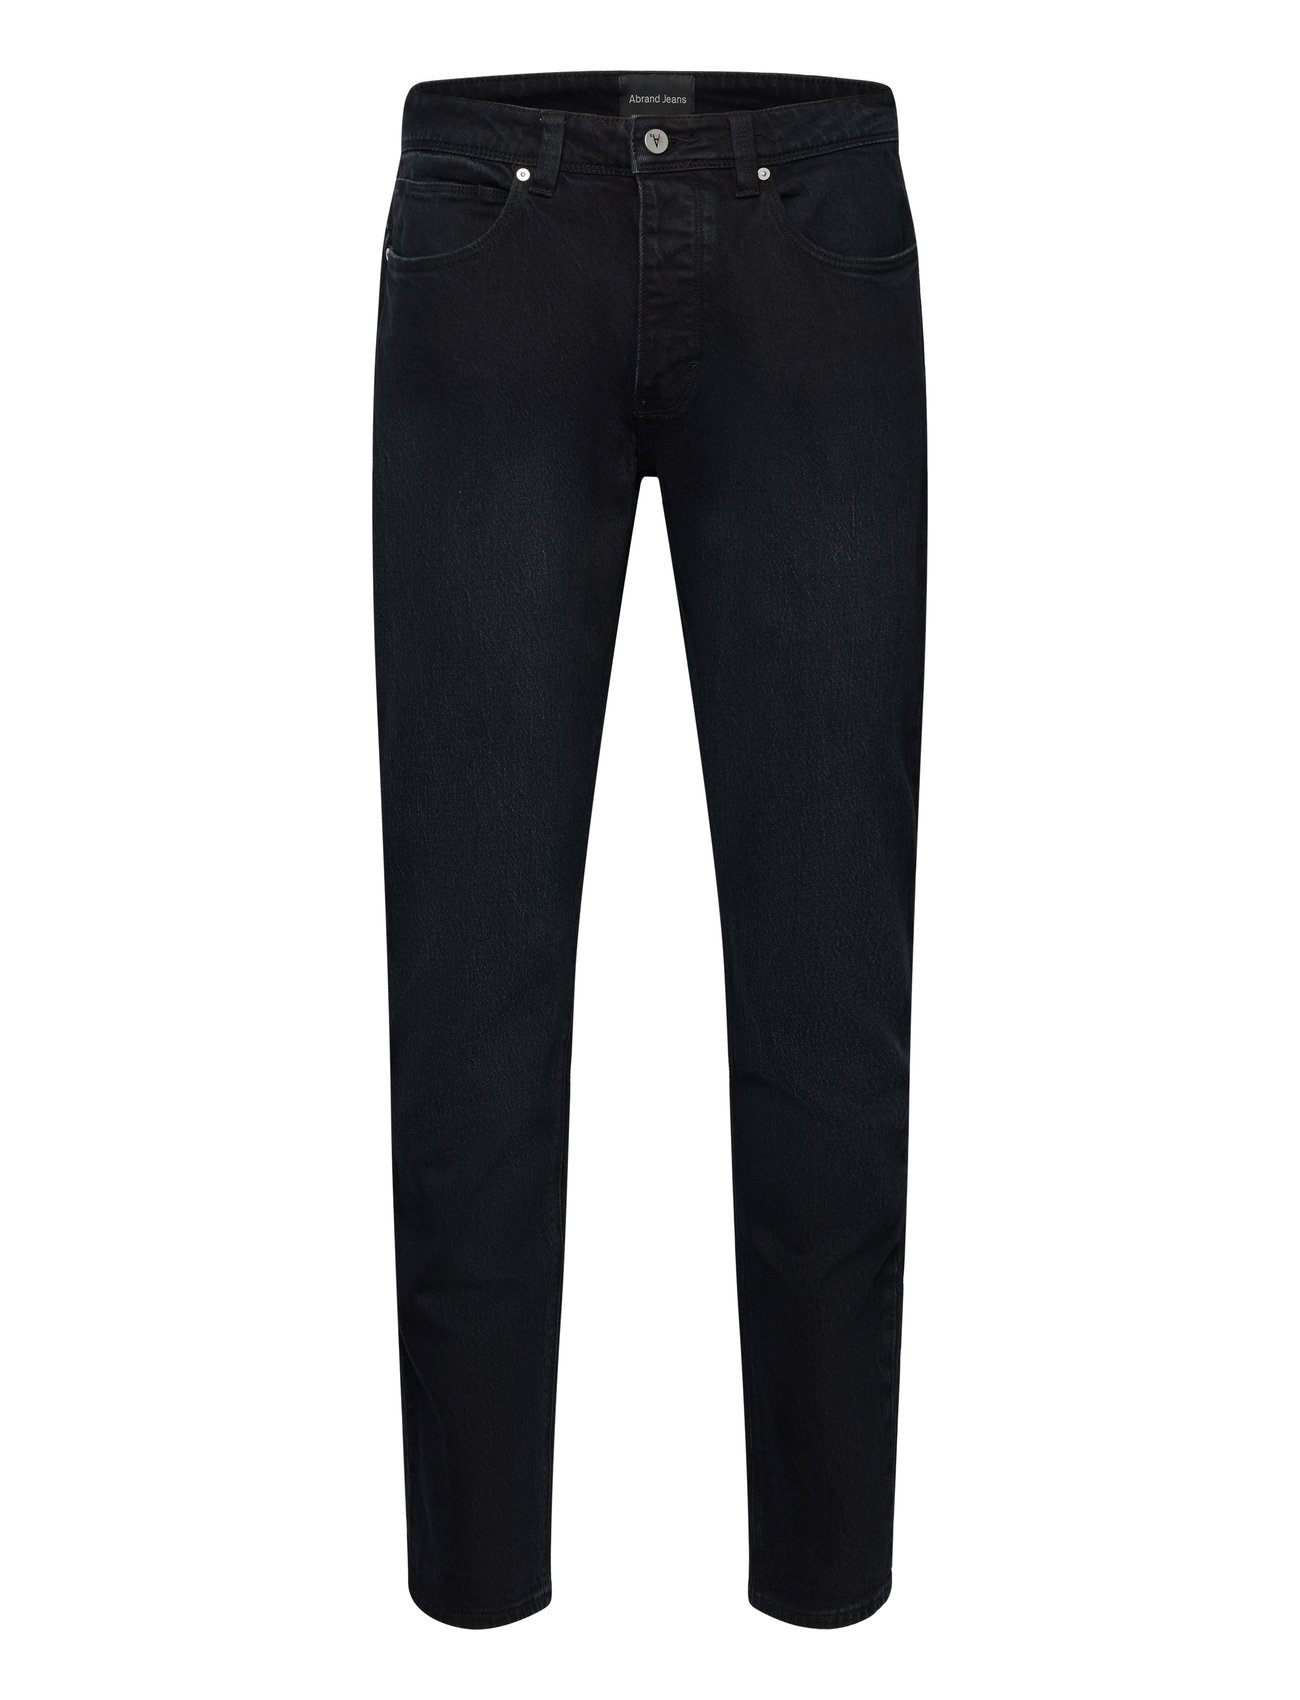 90S Relaxed Quadrant Bottoms Jeans Relaxed Black ABRAND